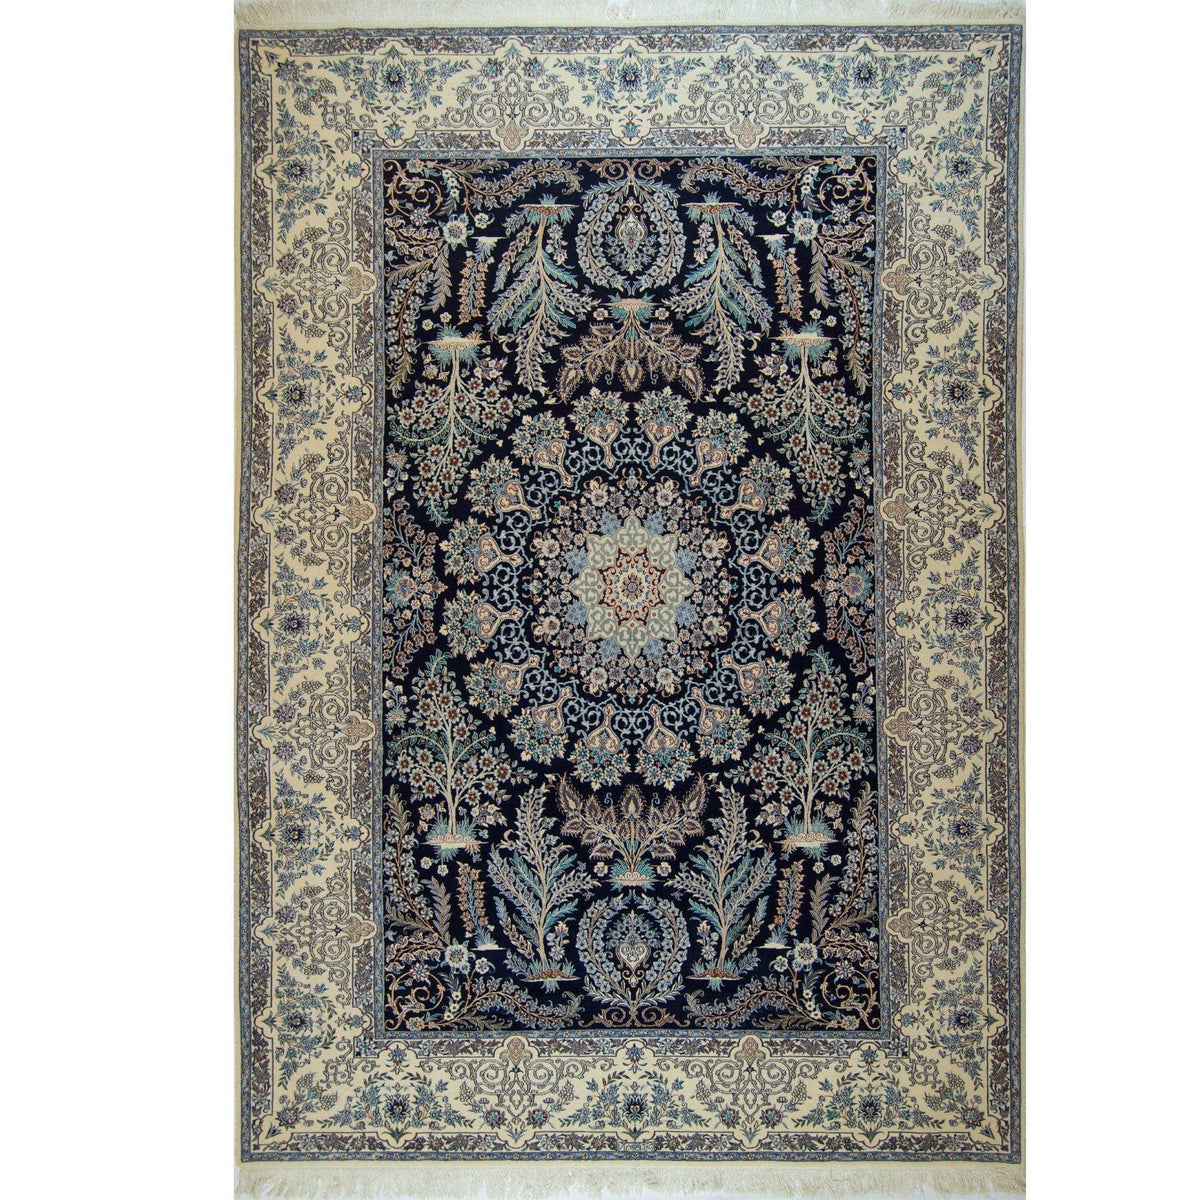 Genuine Super Fine Hand-knotted Persian Wool &amp; Silk Nain Rug (SIGNED HABIBIAN )